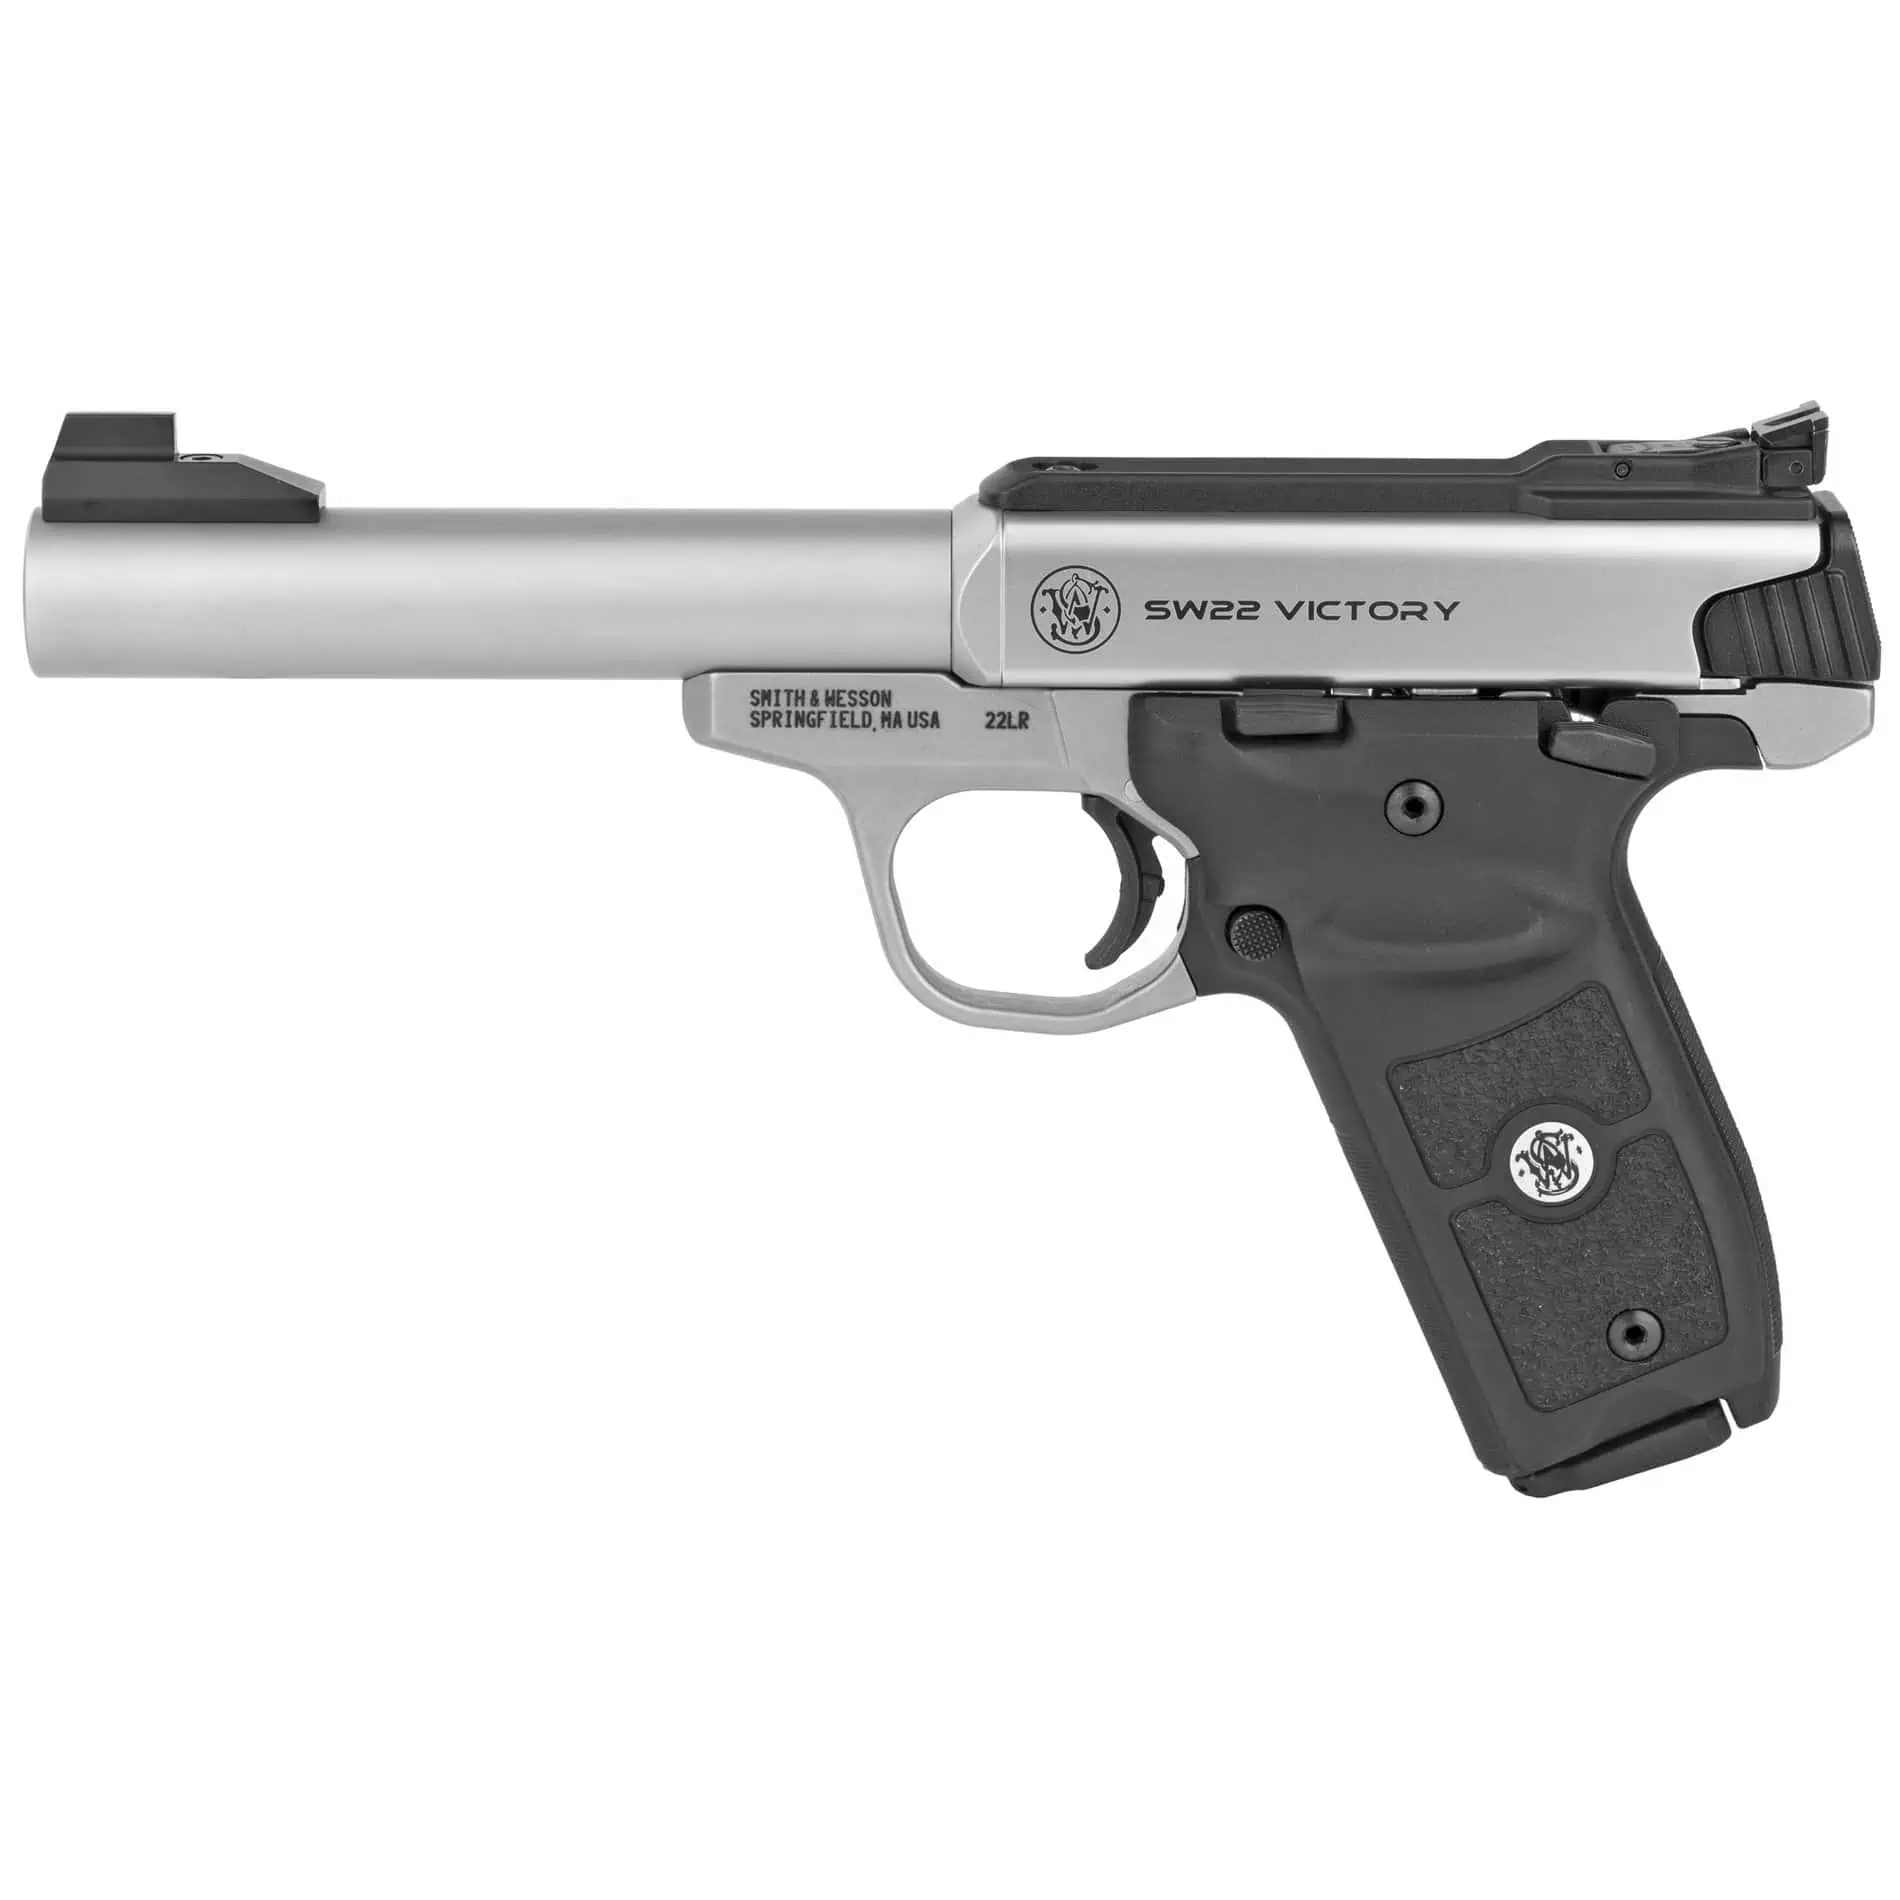 S&W Victory Target 22LR 5.5" Pistol -10 Round - Stainless